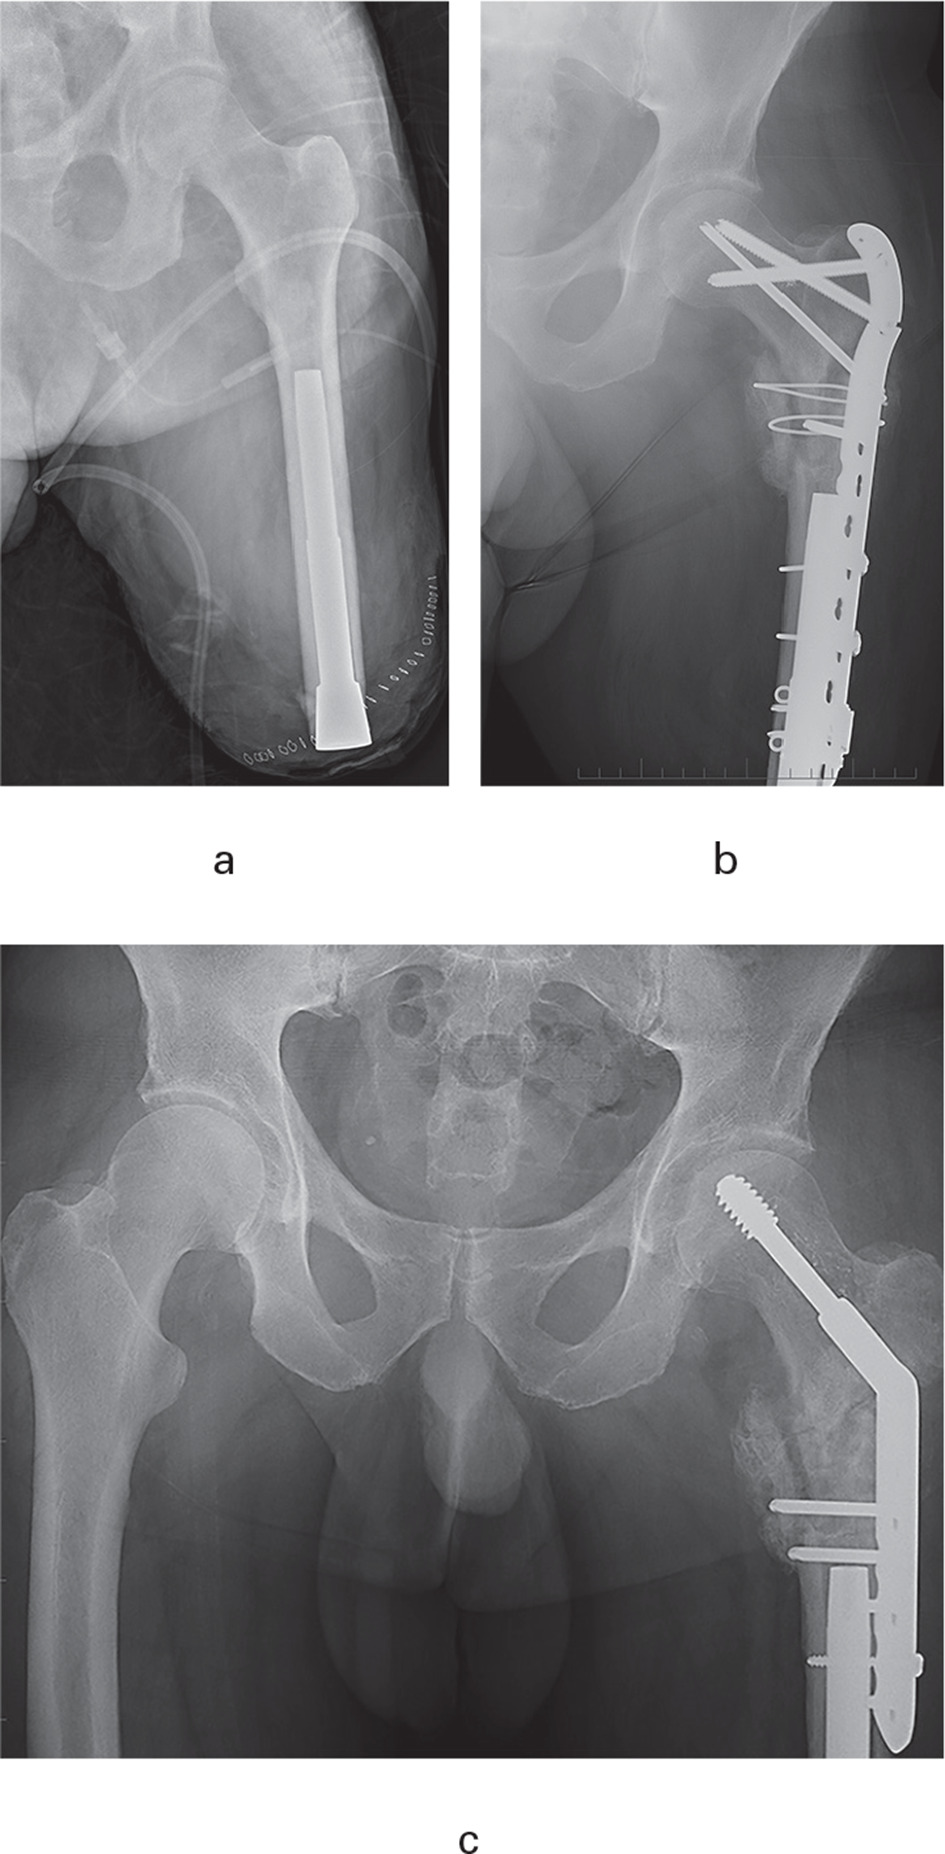 Fig. 4 
          Anteroposterior radiographs of the left hip and femur (a and b) and pelvis (c) of a 62-year-old man with who had left transfemoral amputation due to cancer; a) the immediate postoperative appearance (12 years and one month after amputation); b) he sustained an intertrochanteric fracture three months later due to a fall; a different surgeon used the recommended reconstruction plate but it broke ten months later, possibly due to excessive varus positioning; c) revision was undertaken by the initial surgeon (MAM) using a dynamic hip screw and no further care has been required for three years. His K-level improved from 2 before osseointegration to 3 after the care of his fracture, and his prosthesis wear remained unchanged at ≥ 16 hours/day.
        